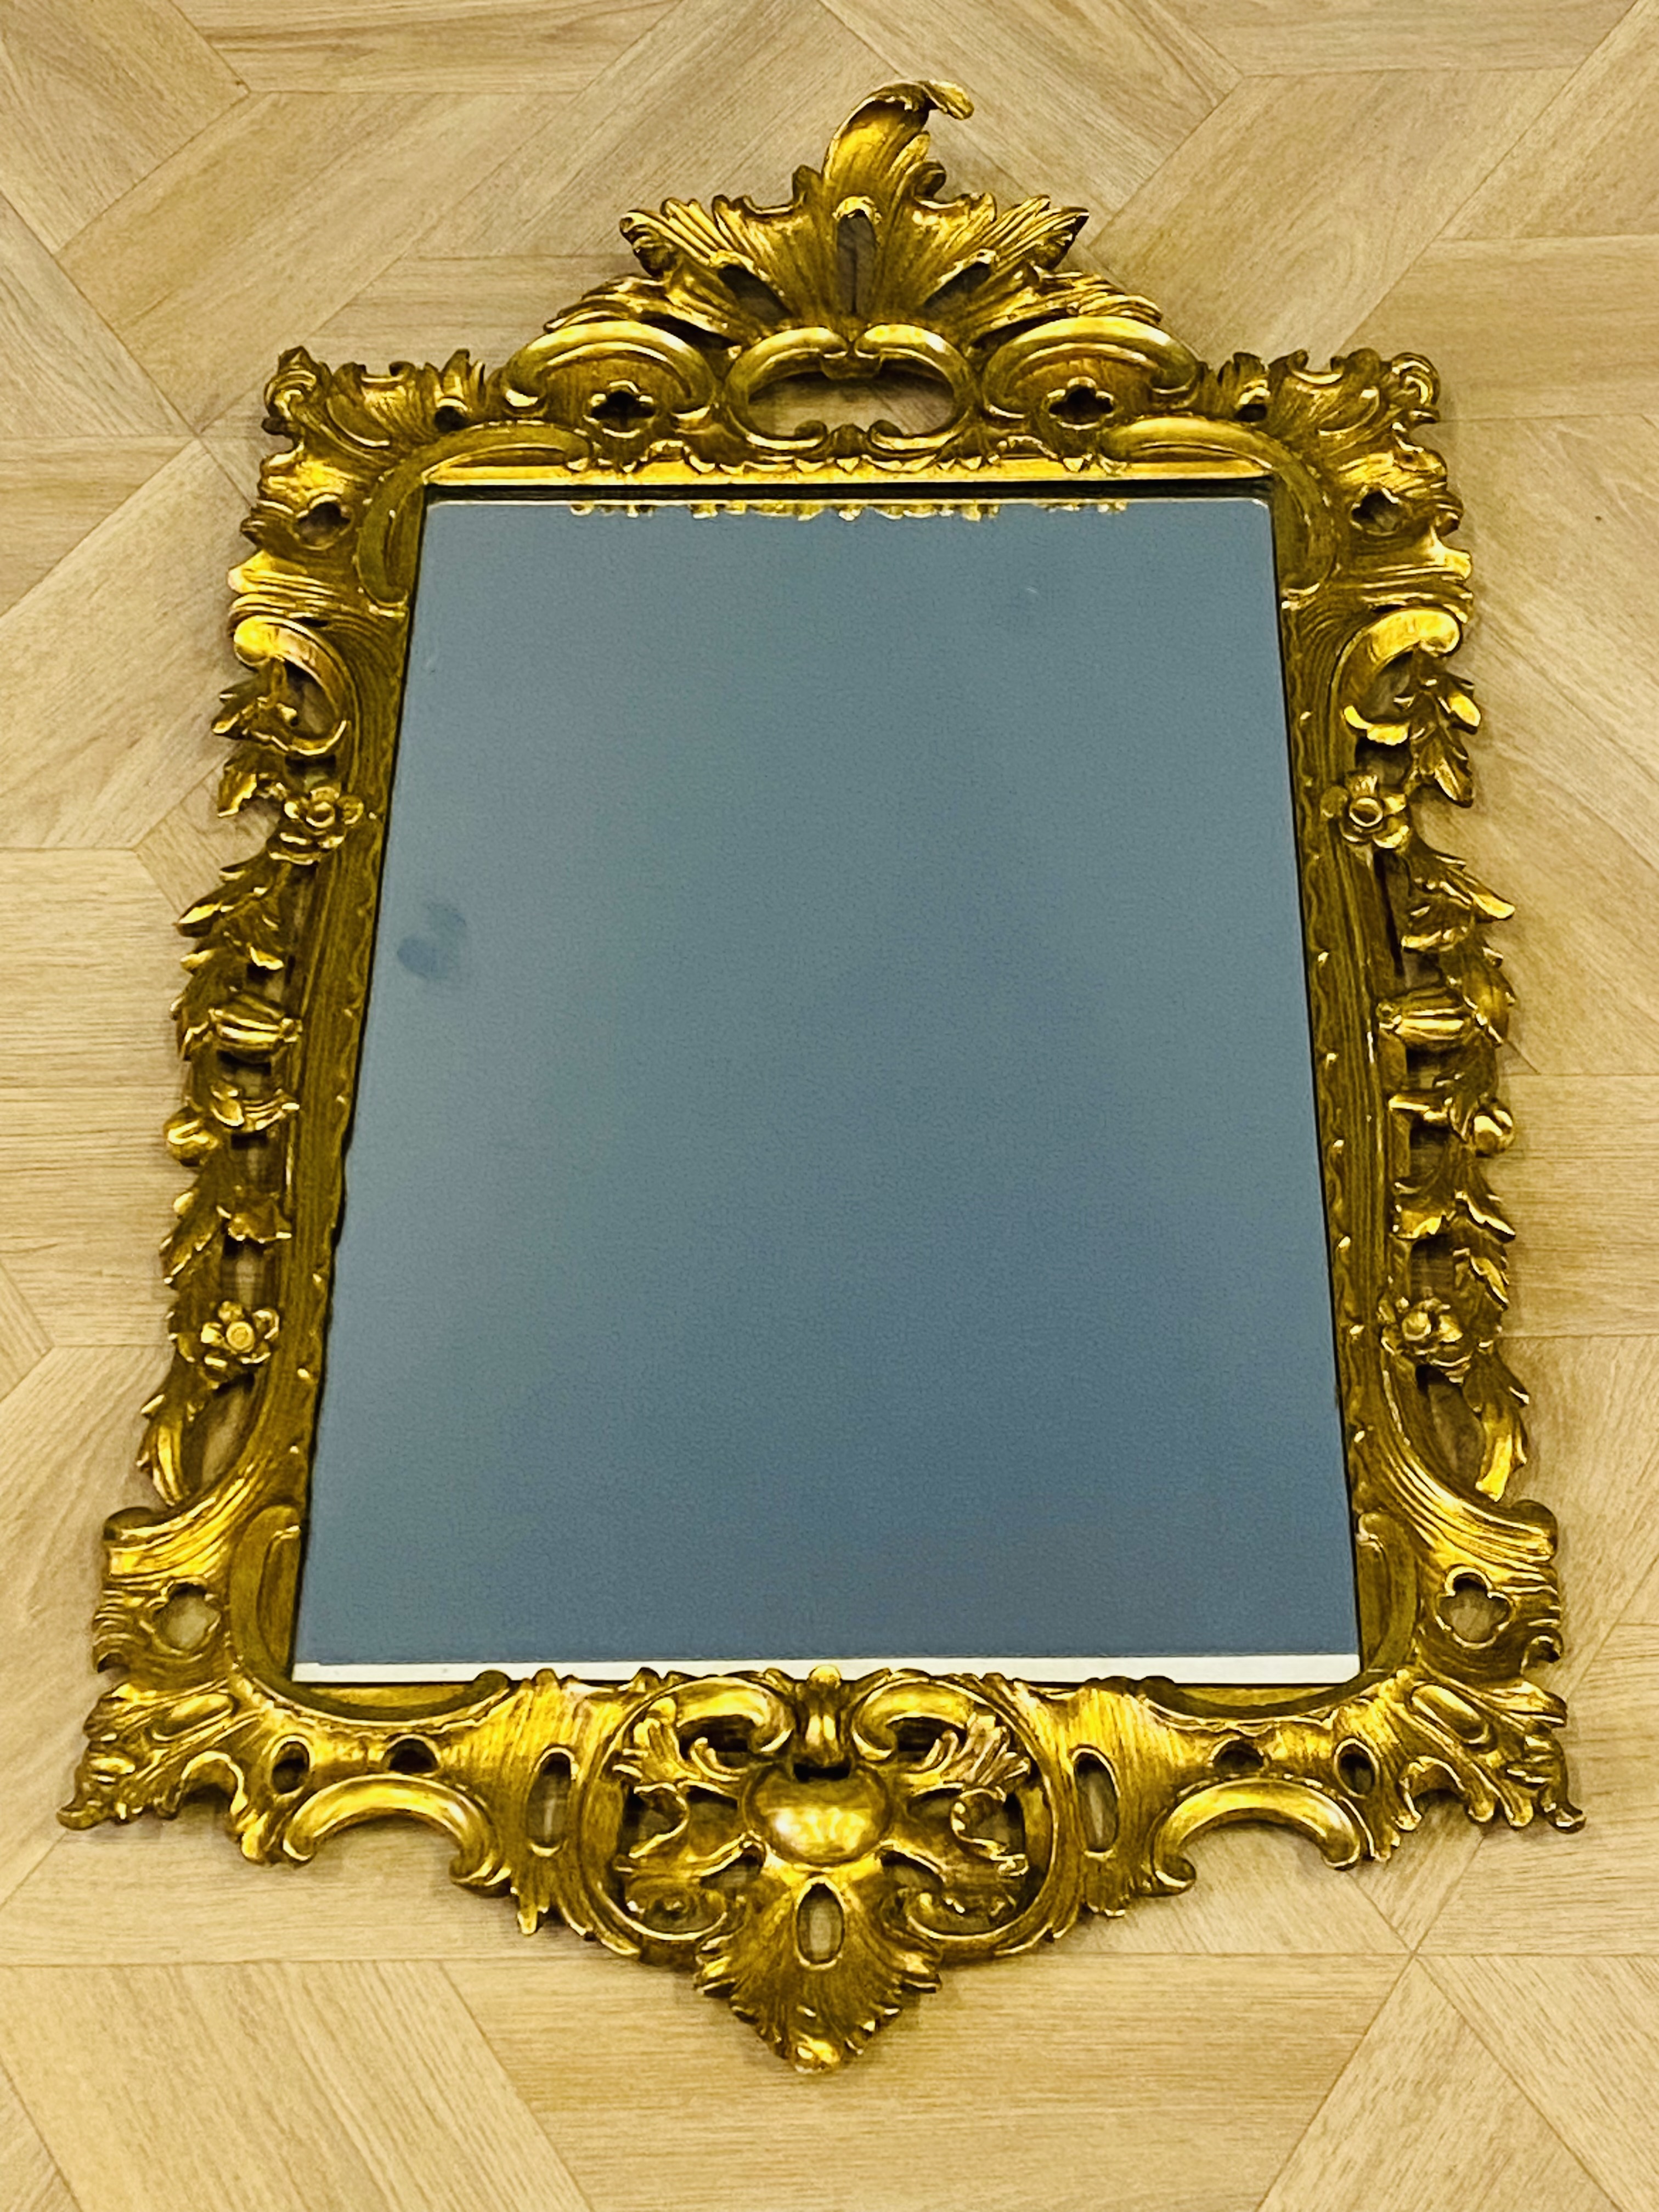 Georgian style carved giltwood mirror